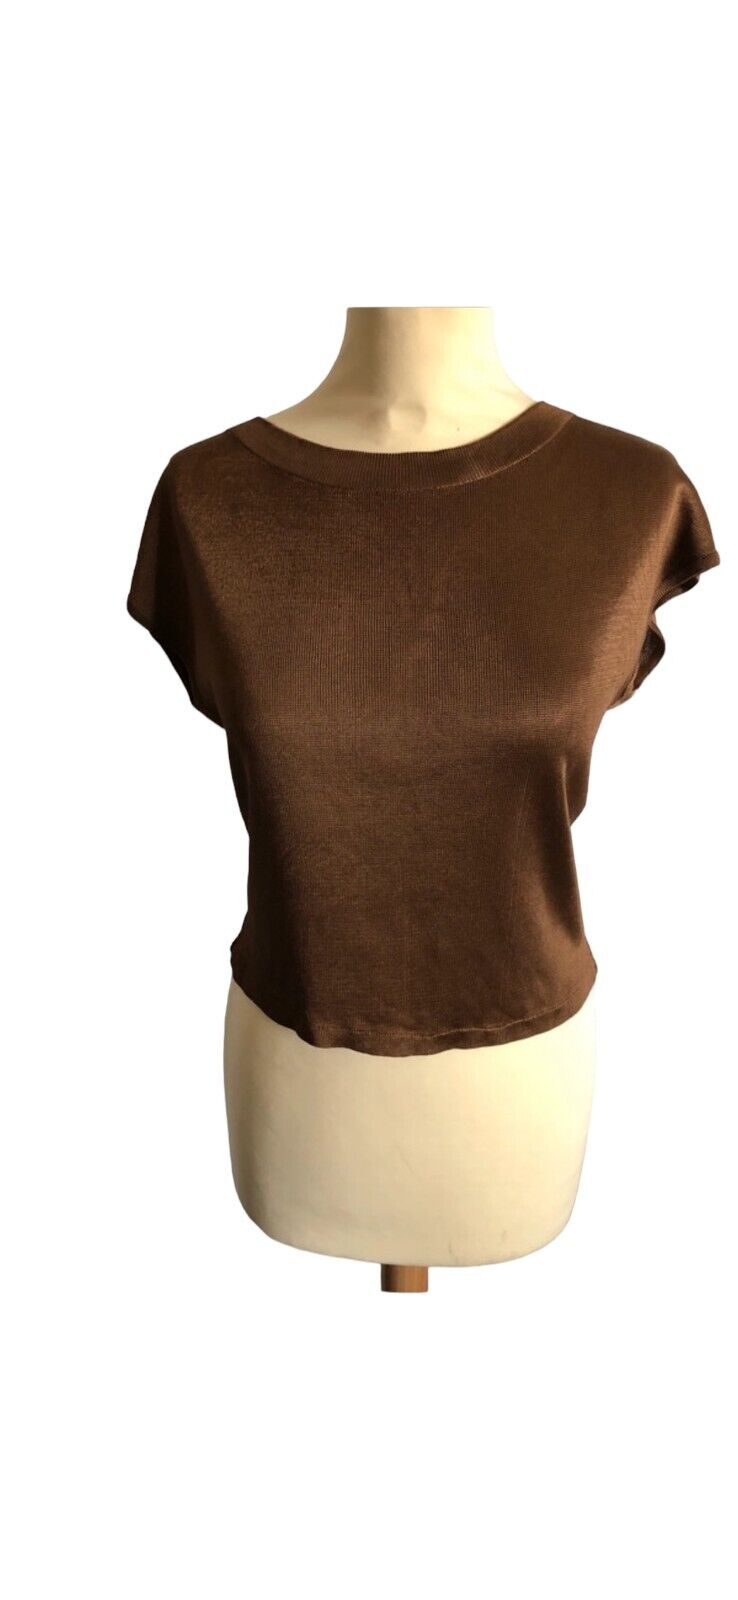 Vintage Brown Knitted T-shirt  Size L fits S to M